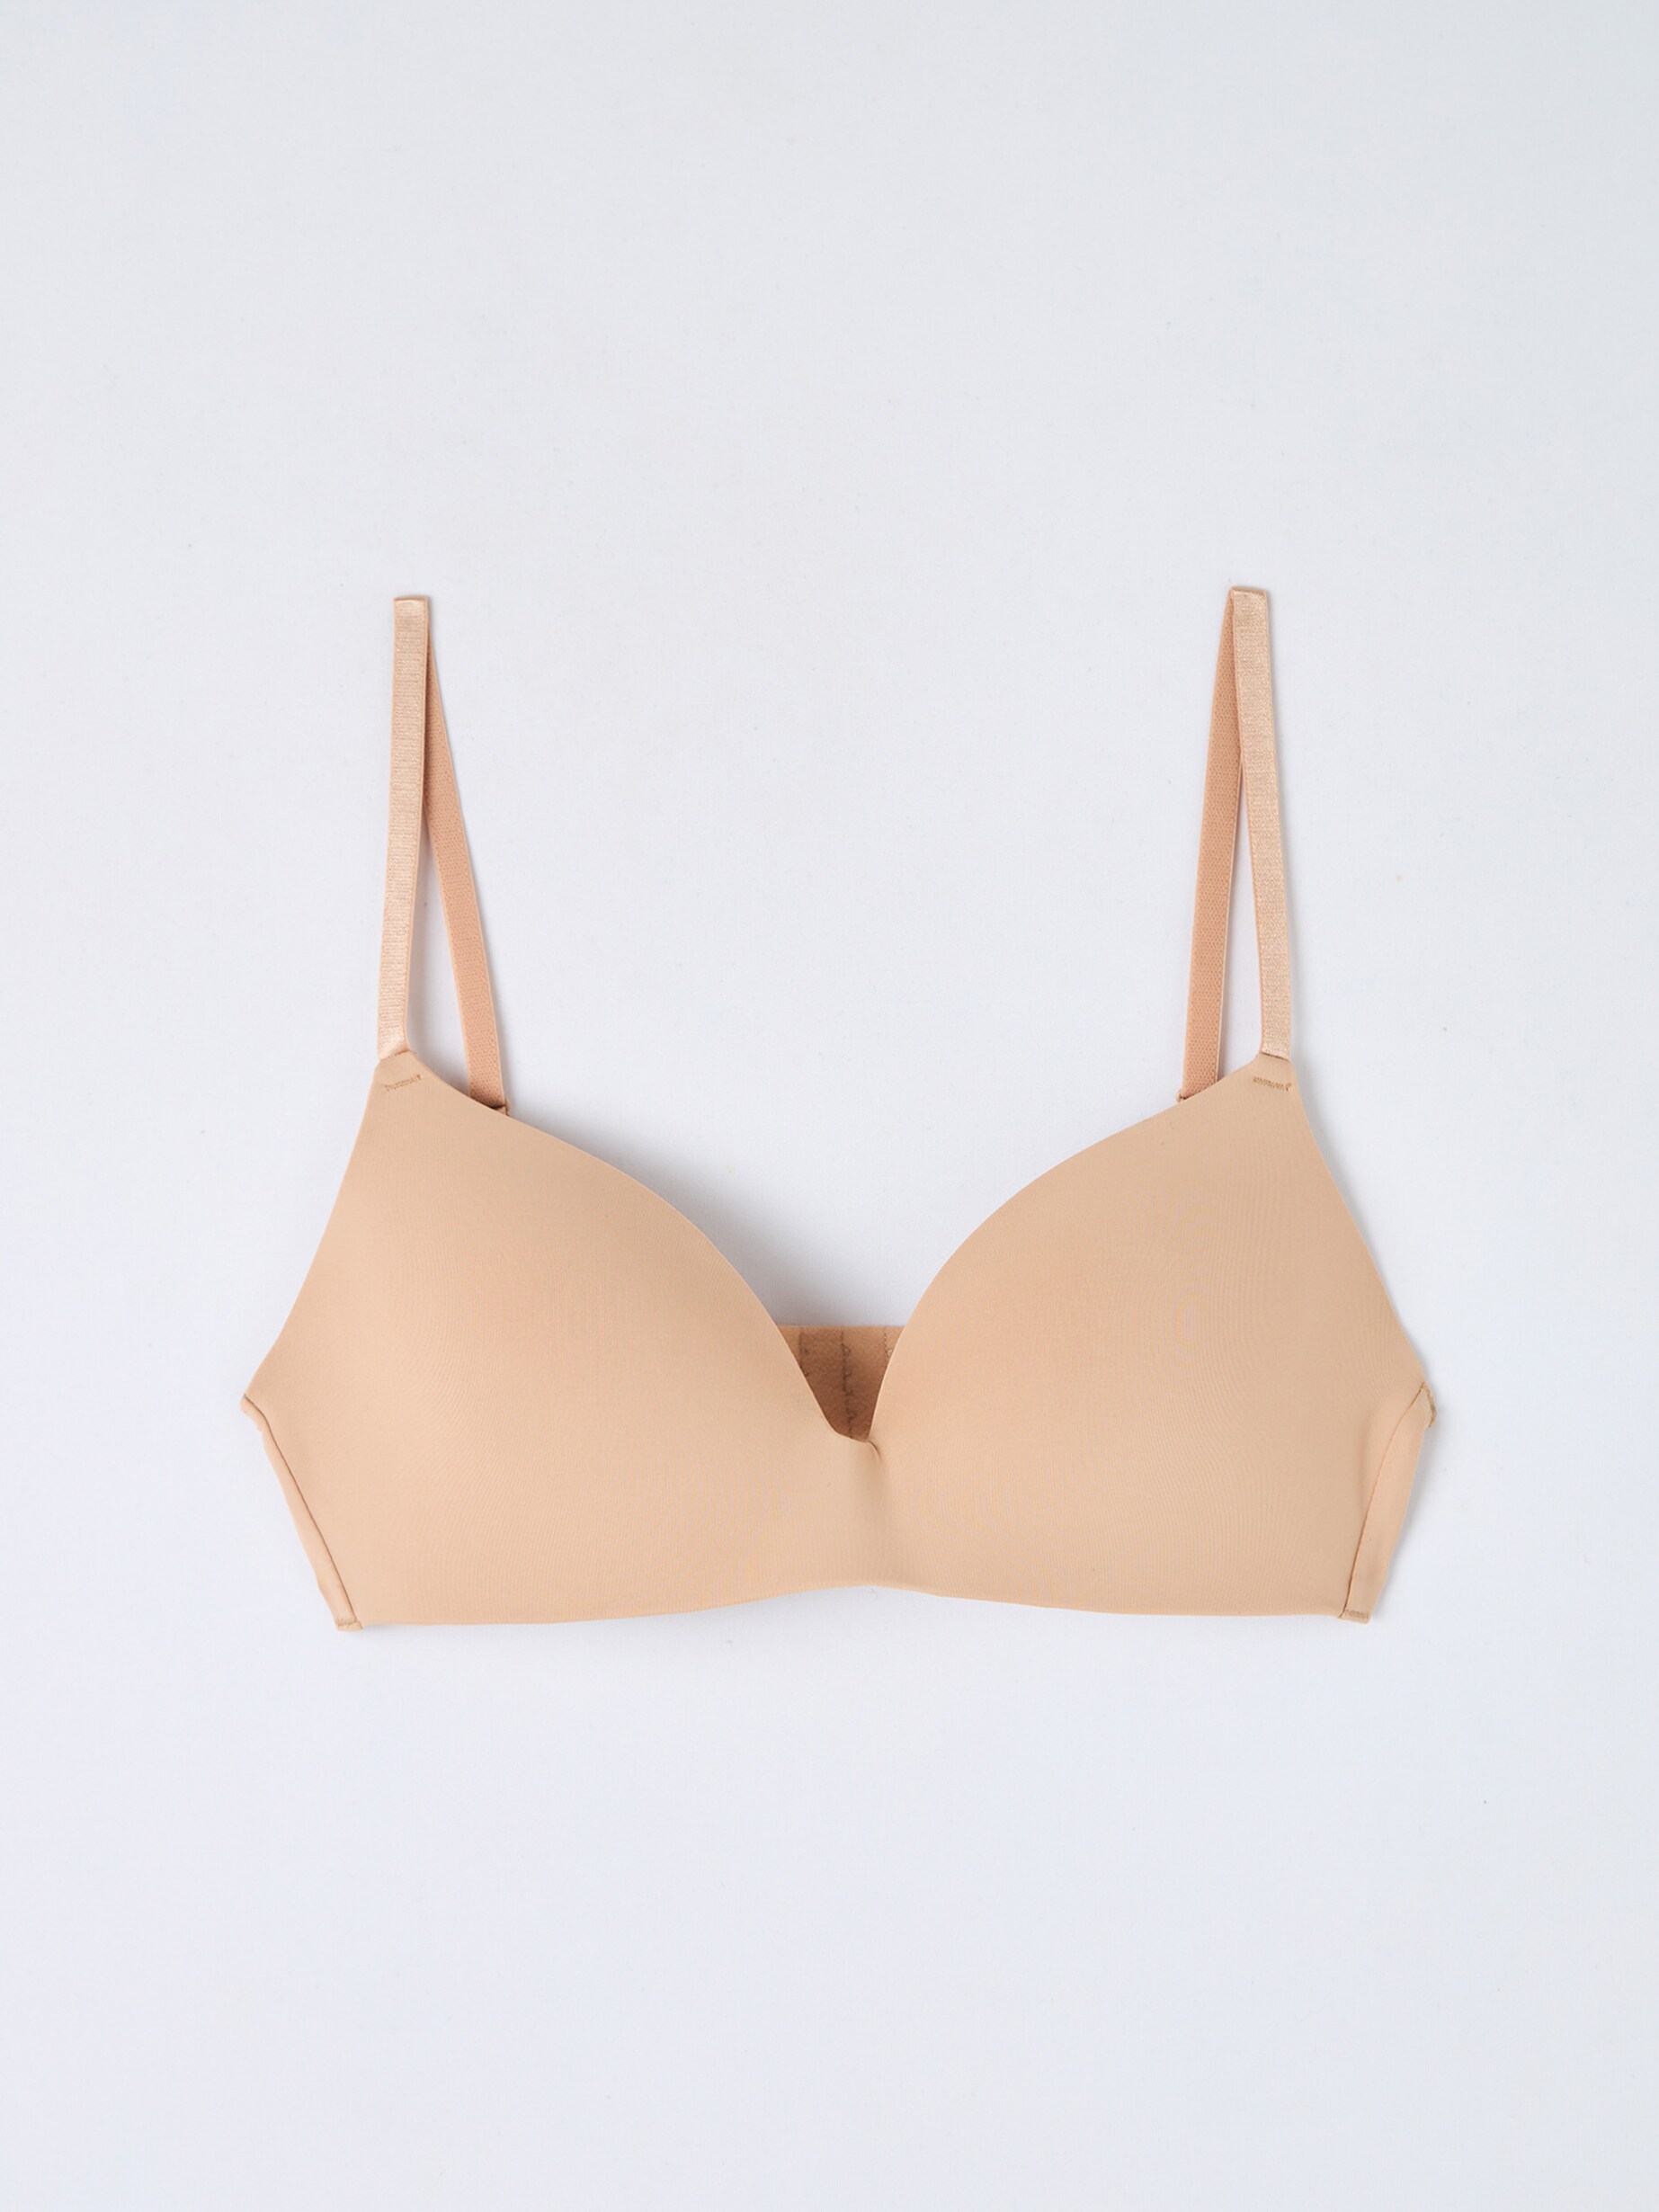 Nude Moulded non-underwired triangle bra - Buy Online